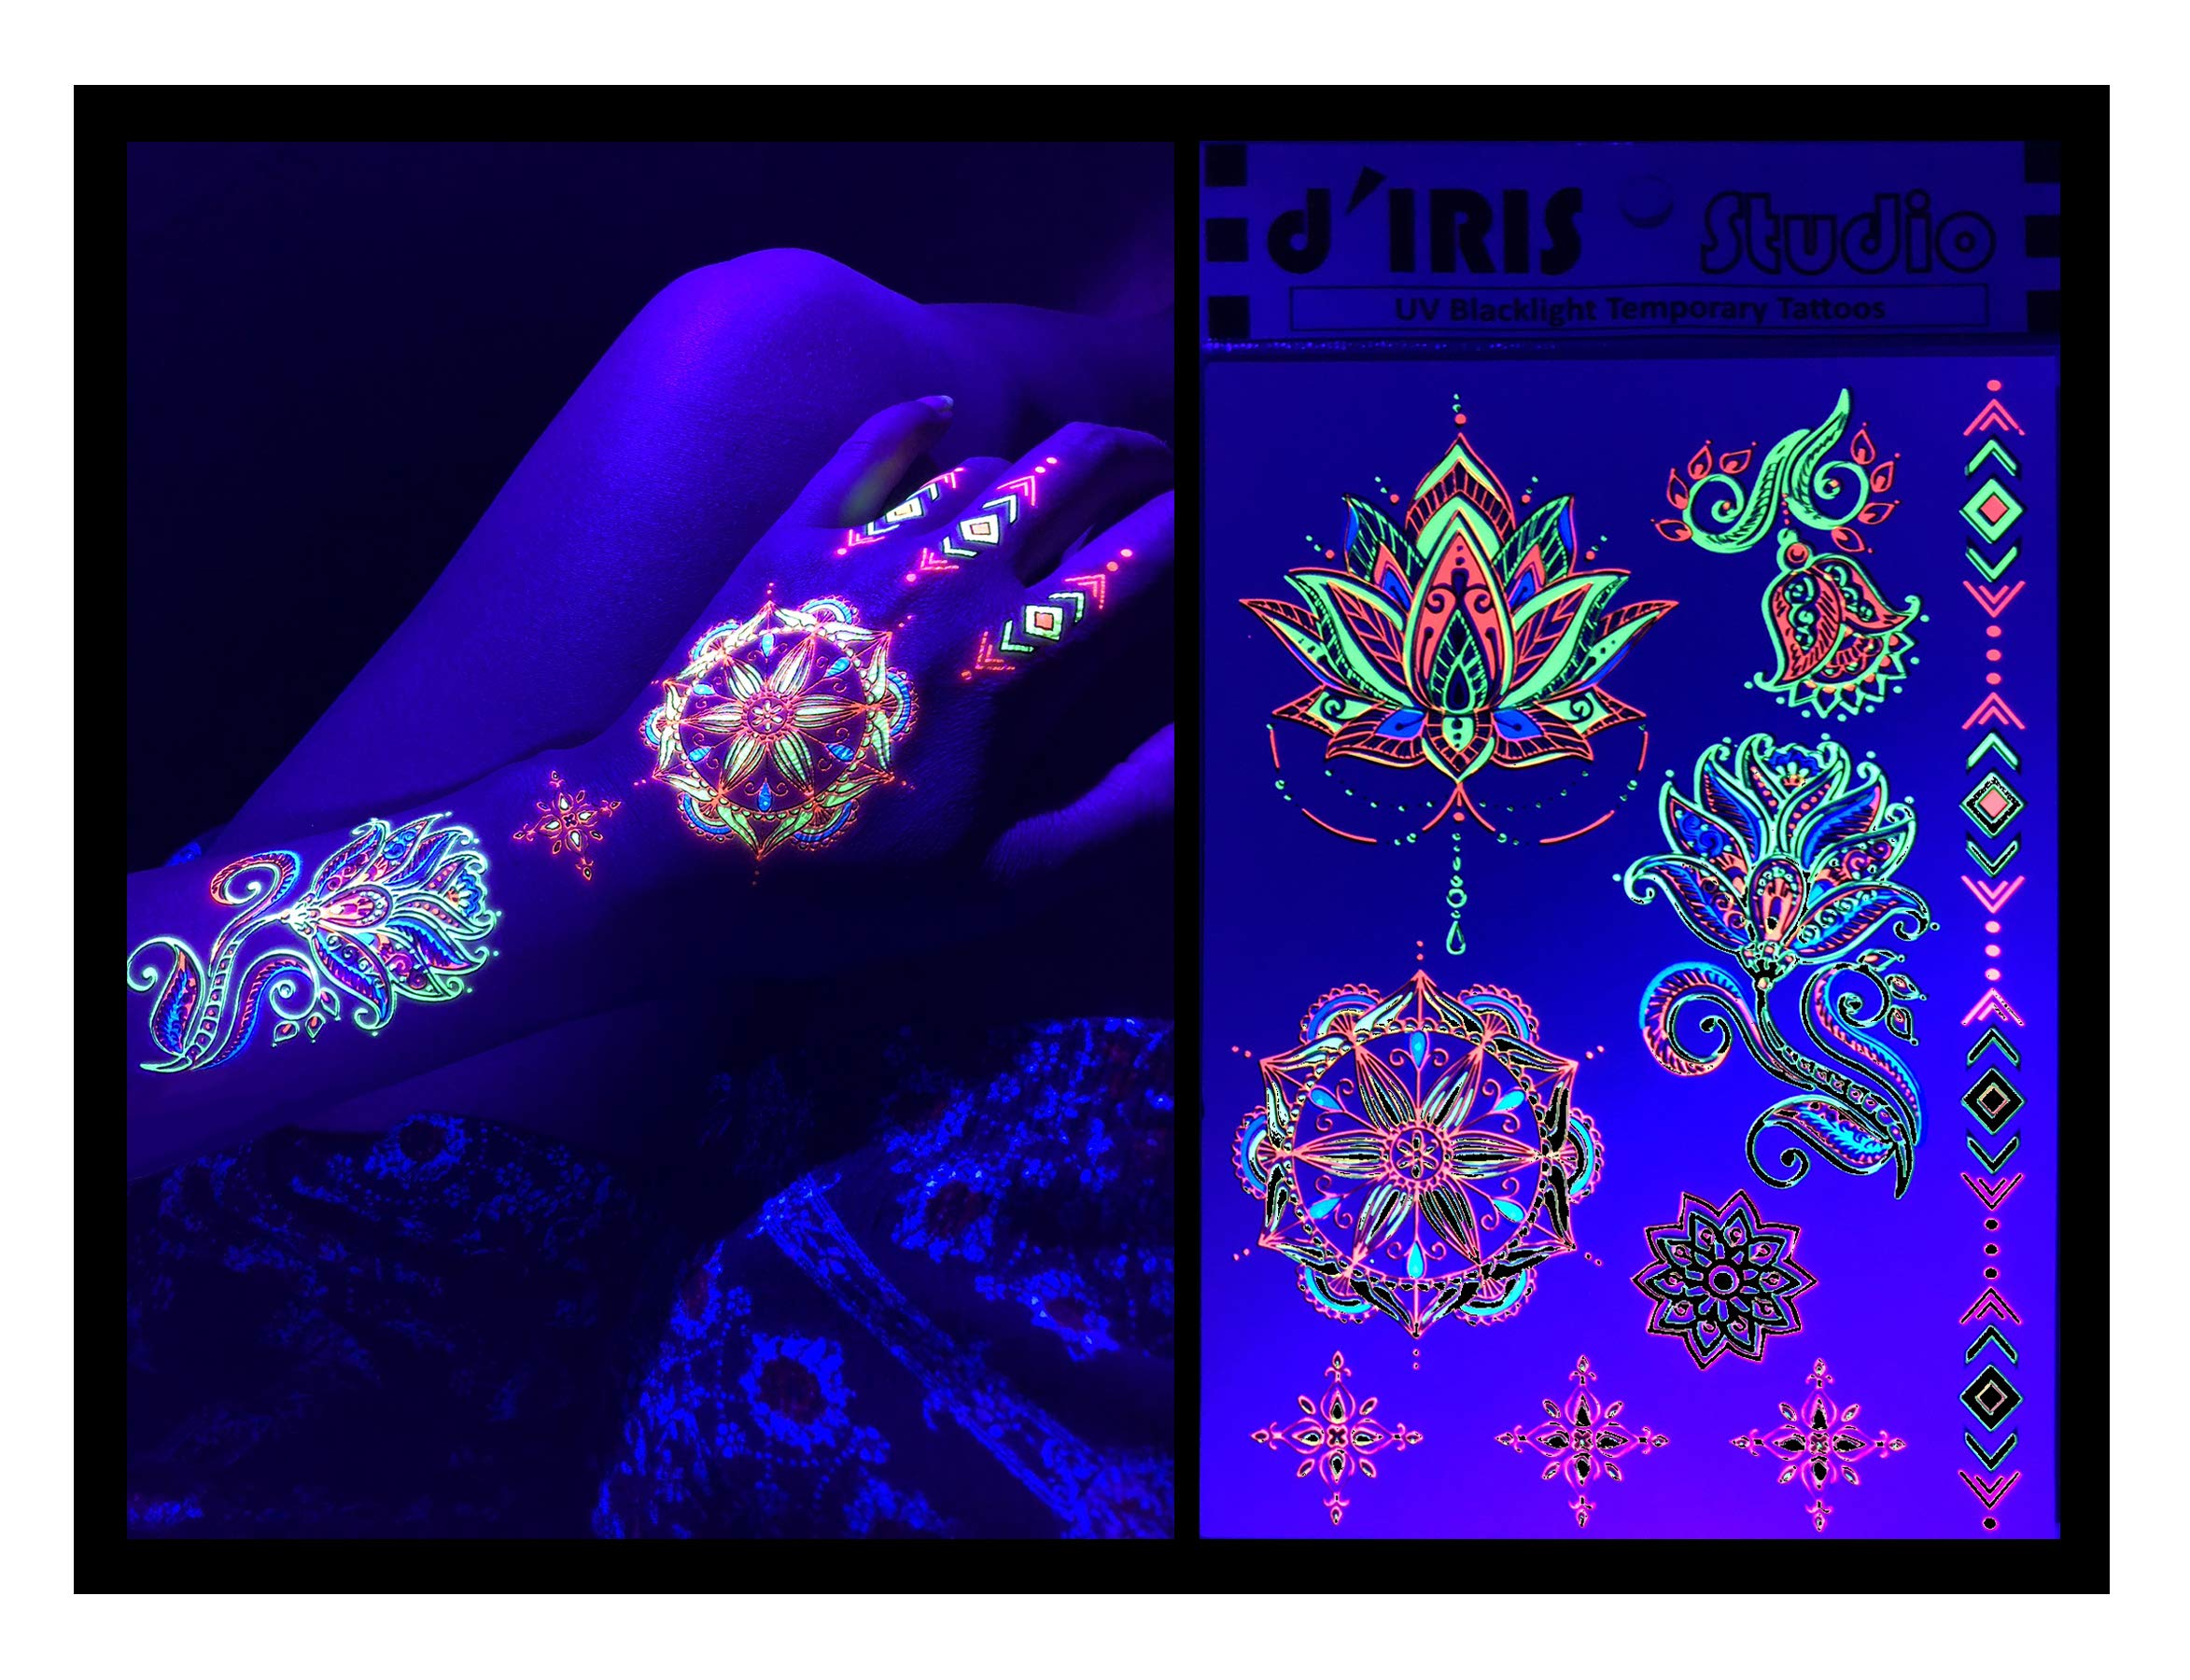 Temporary Tattoos for Glow Party UV Blacklight – 1 Sheet Lotus Floral Body Paint Art Light Festival Accessories Glow in the Dark Makeup | 7.2” x 5.2” Temp Great for EDM EDC Party Rave Parties